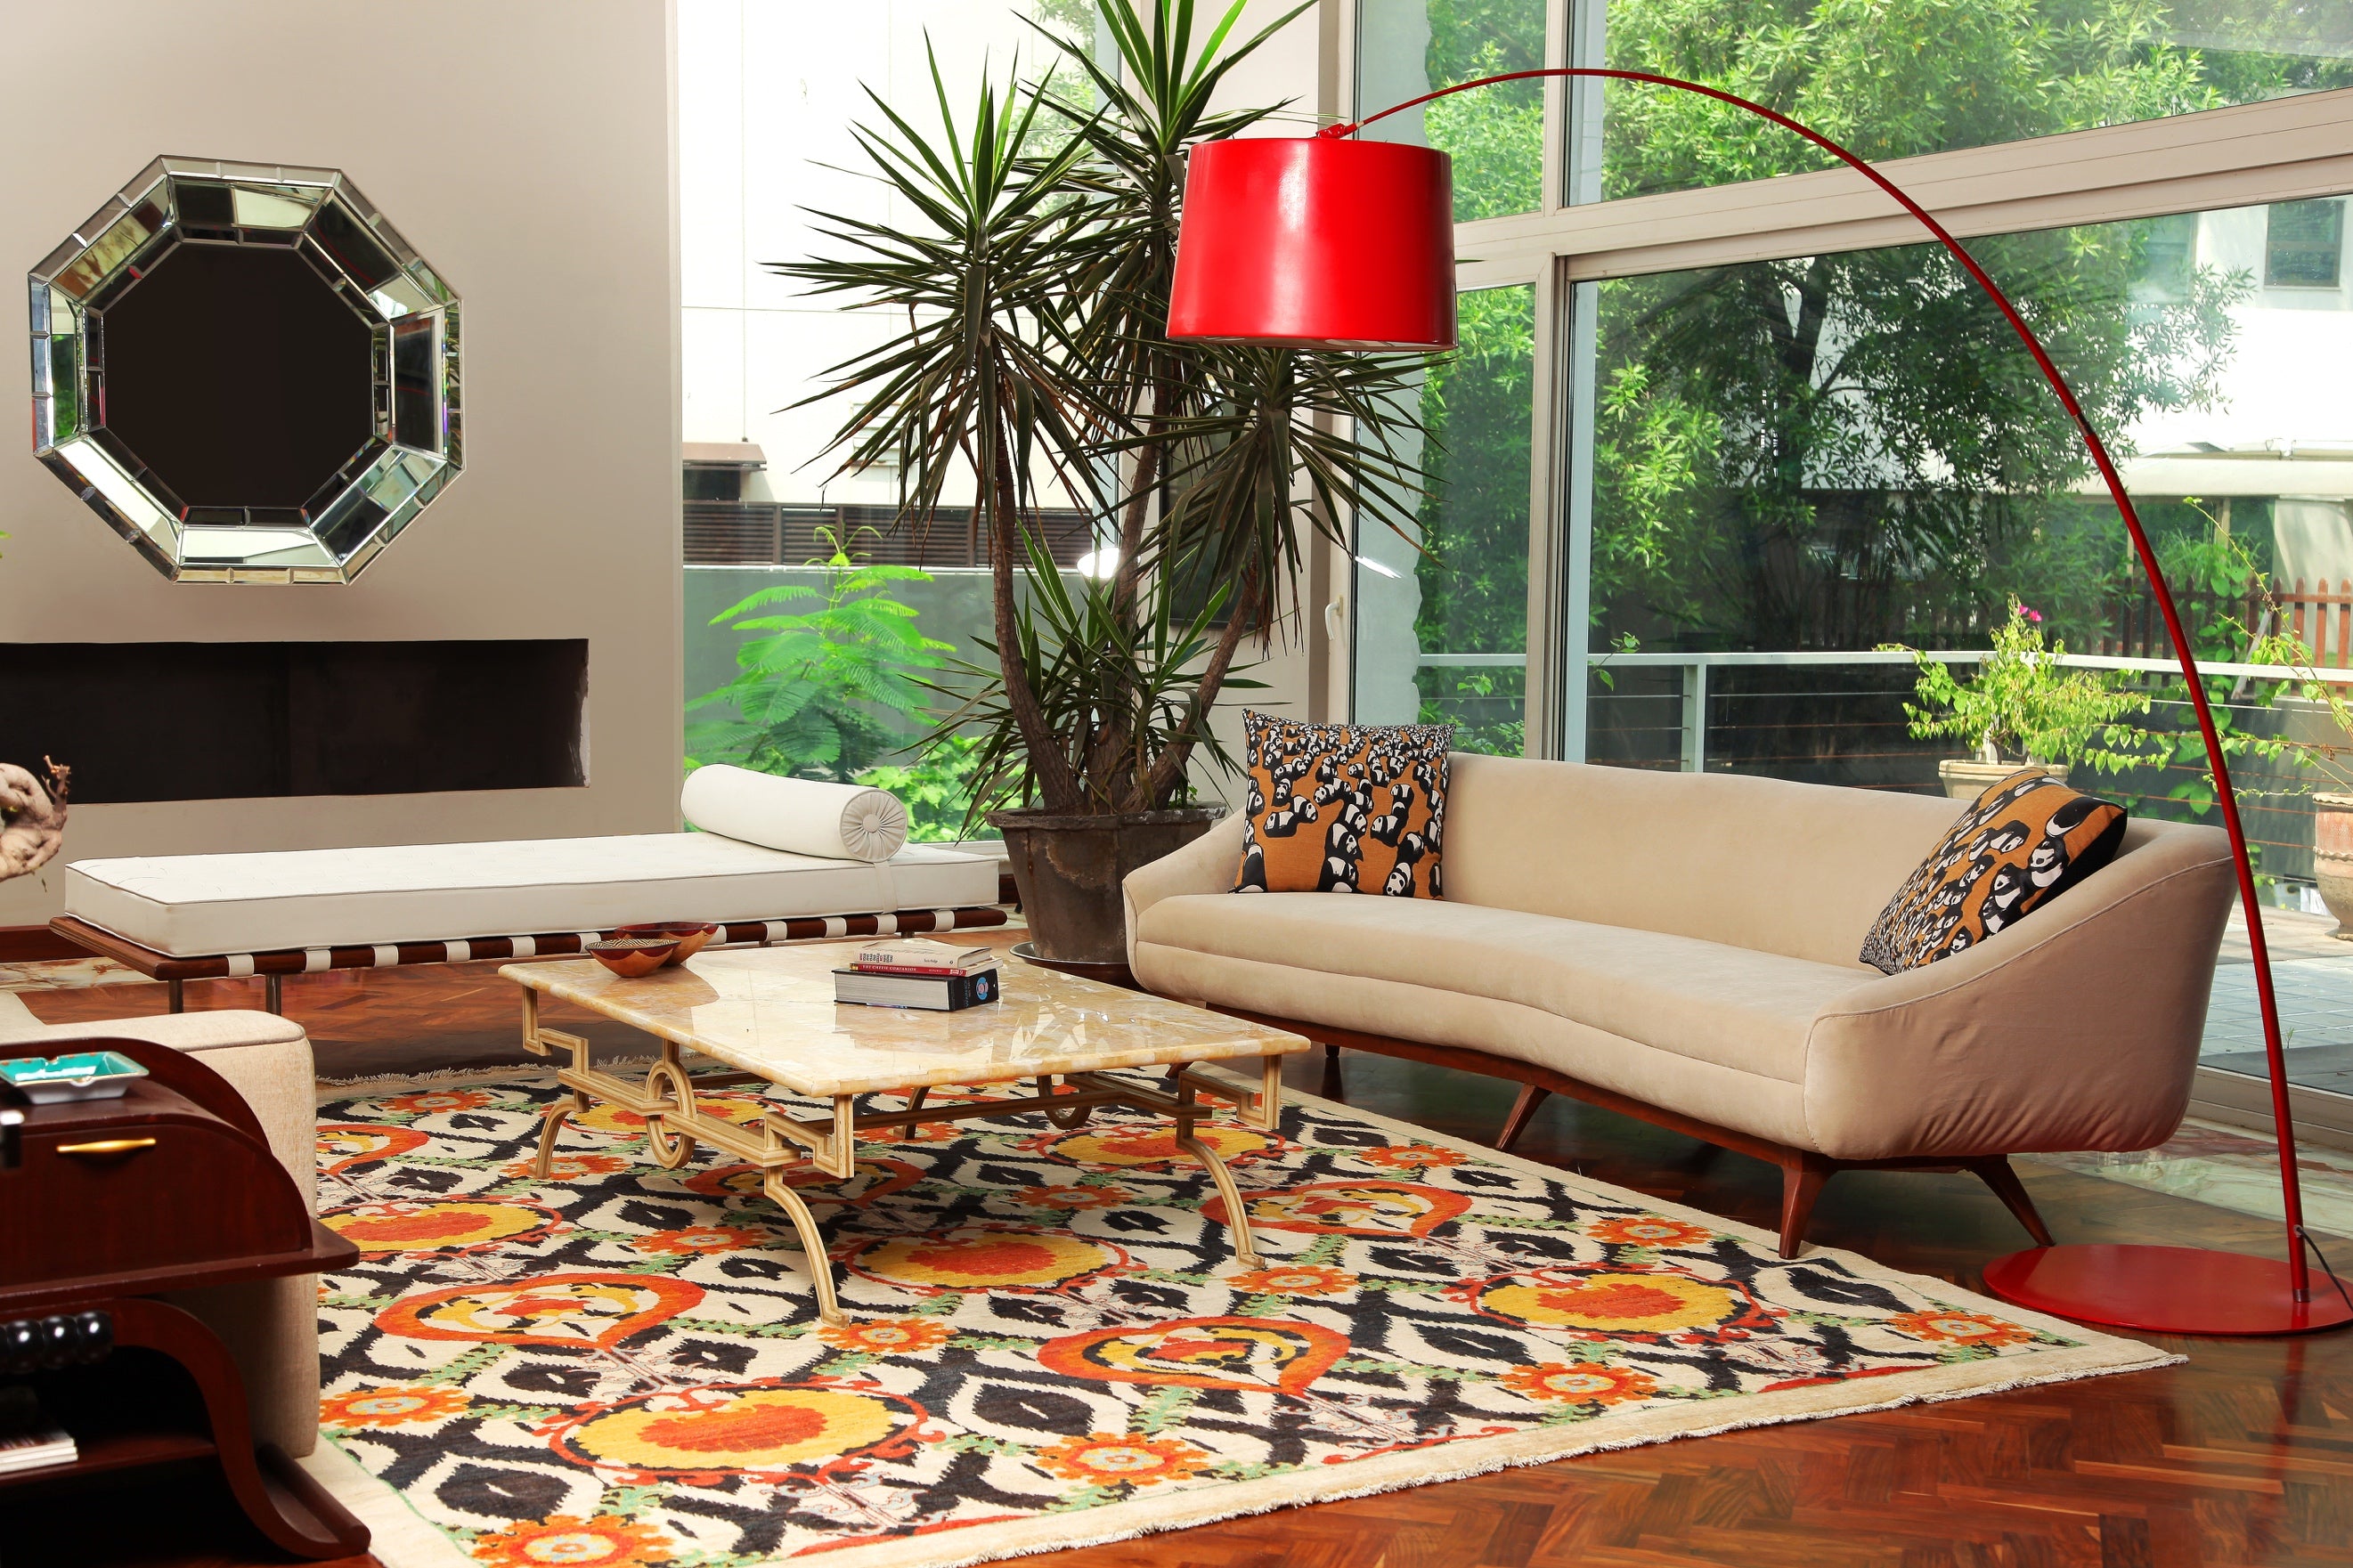 Patterned rugs are an amazing way to give any room a bold new look.